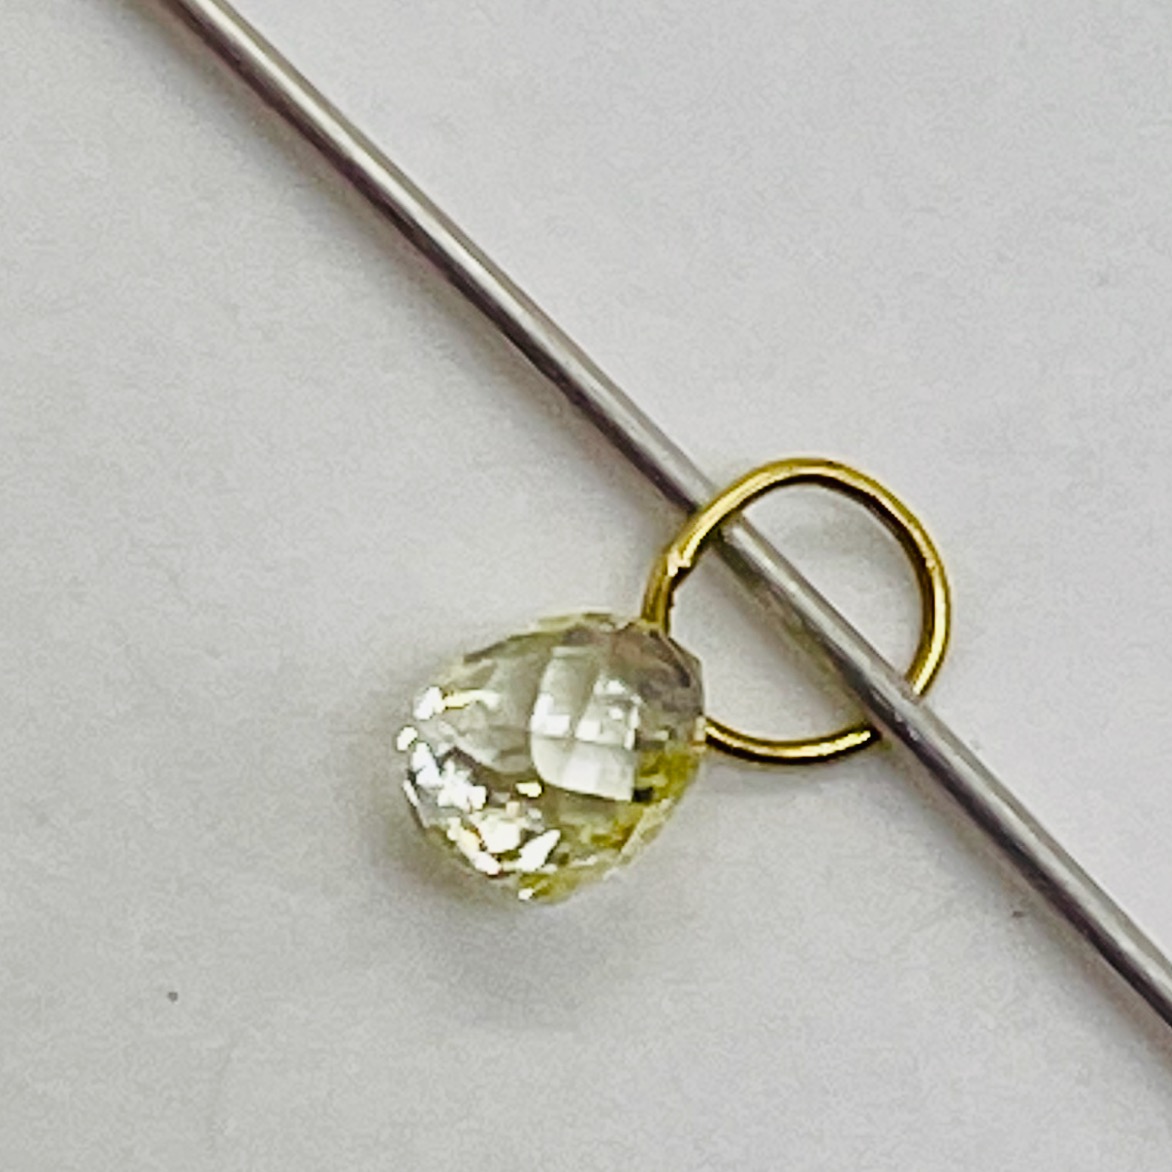 Natural Canary Diamond 18K Gold Pendant | ,0.29cts | 4x2.5mm | - image 5 of 12